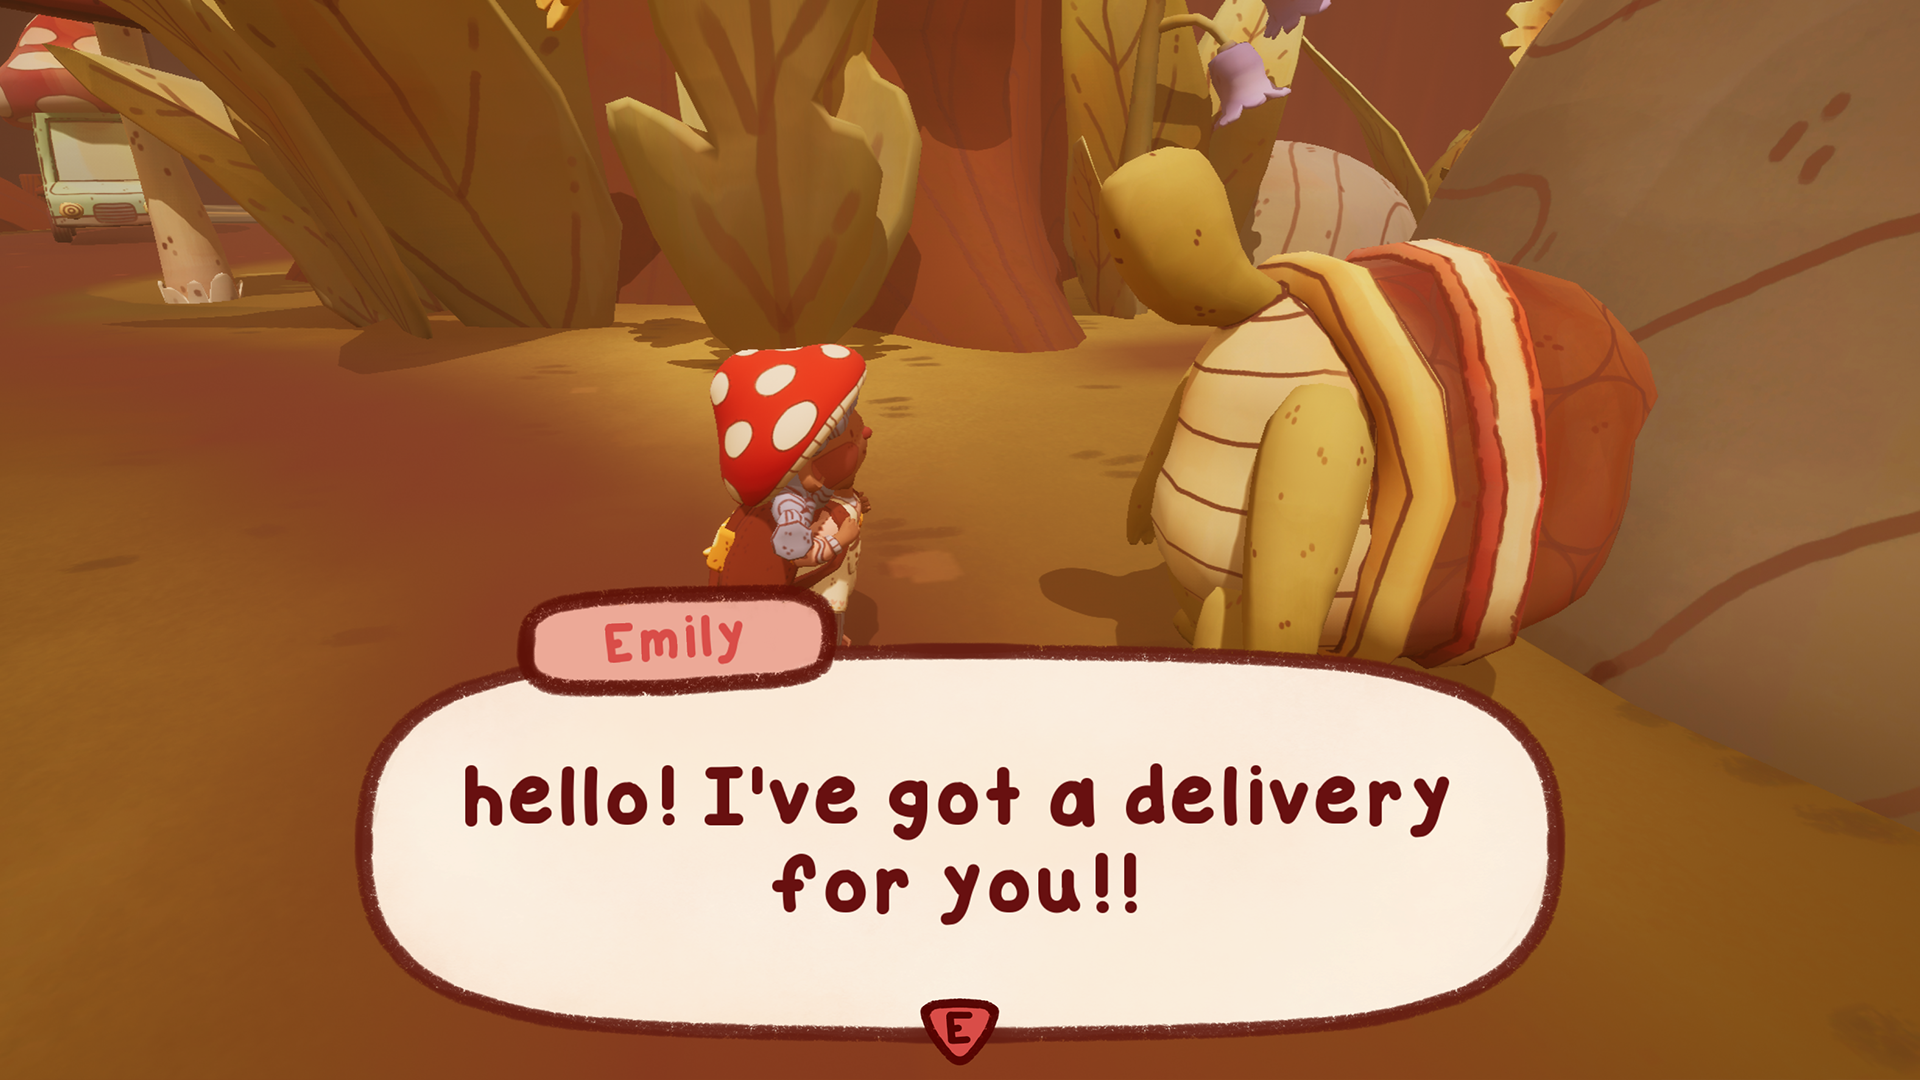 A mushroom wearing character speaks to a turtle in a forest with the text saying hello I've got a delivery for you!!!